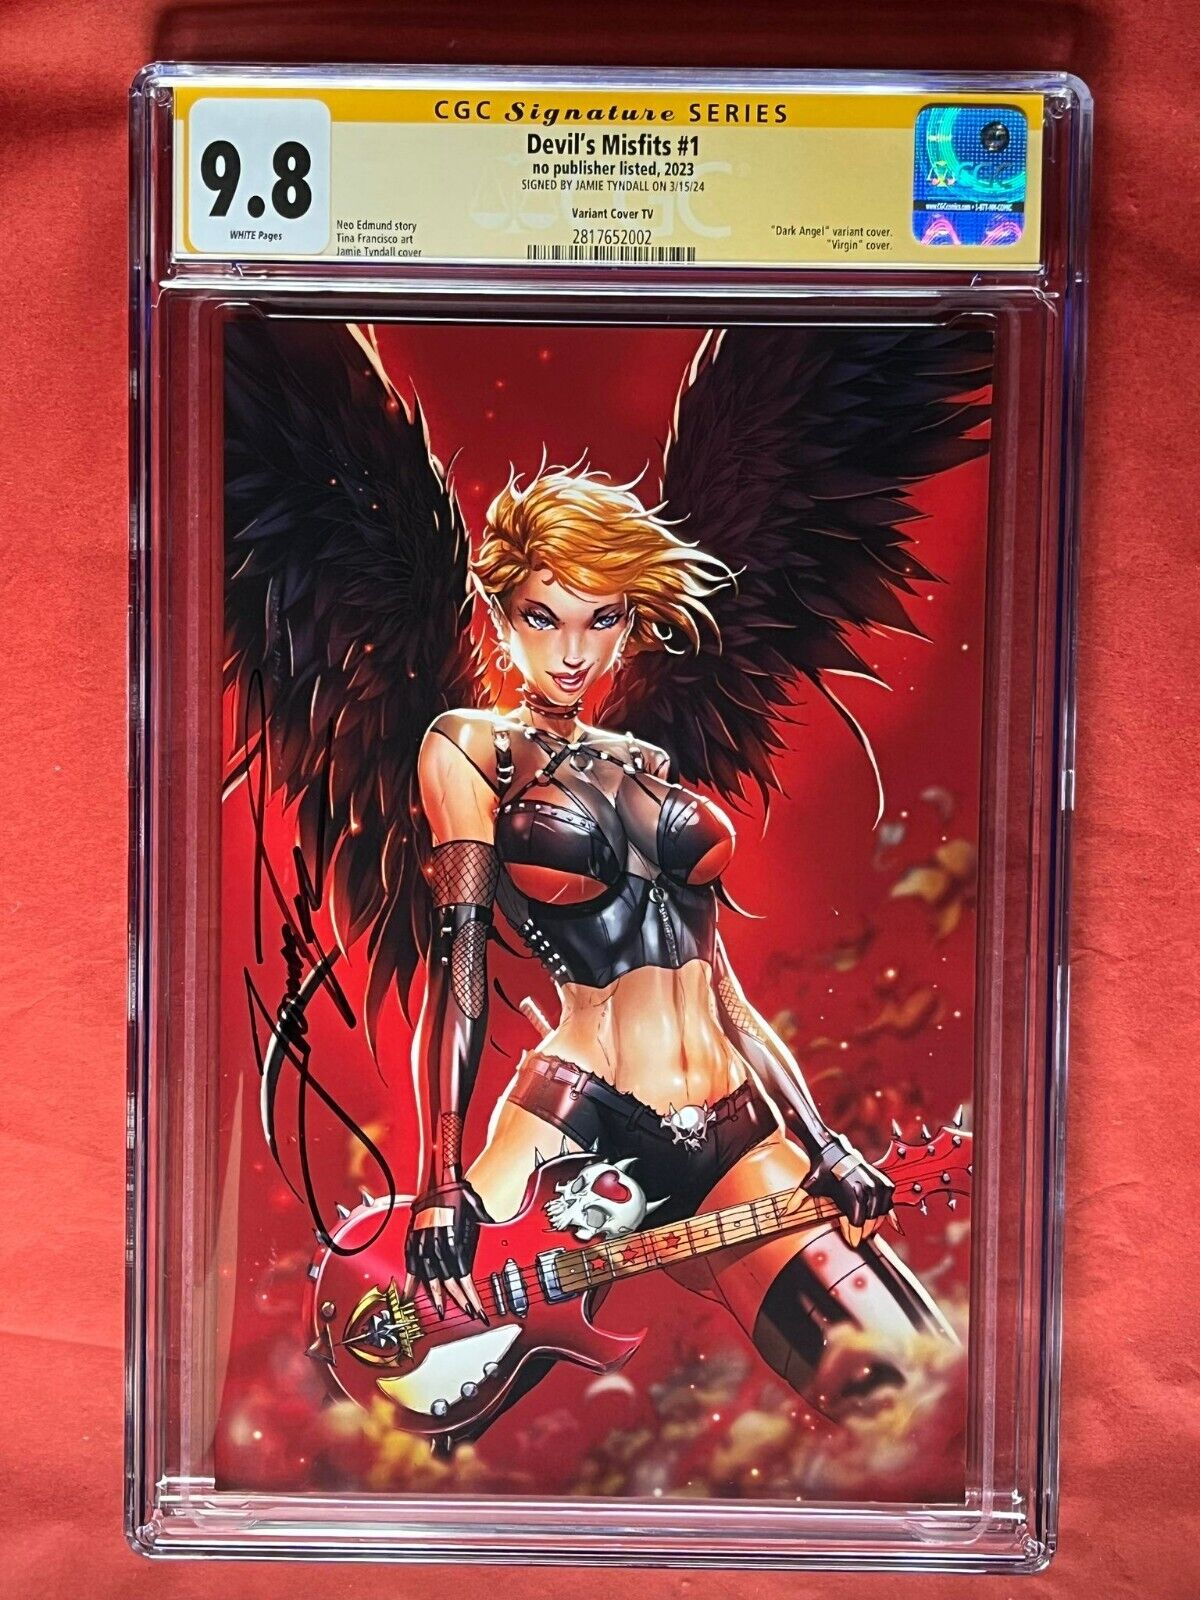 The Devil’s Misfits 1 Cover TV Variant CGC 9.8 SS signed by Jamie Tyndall